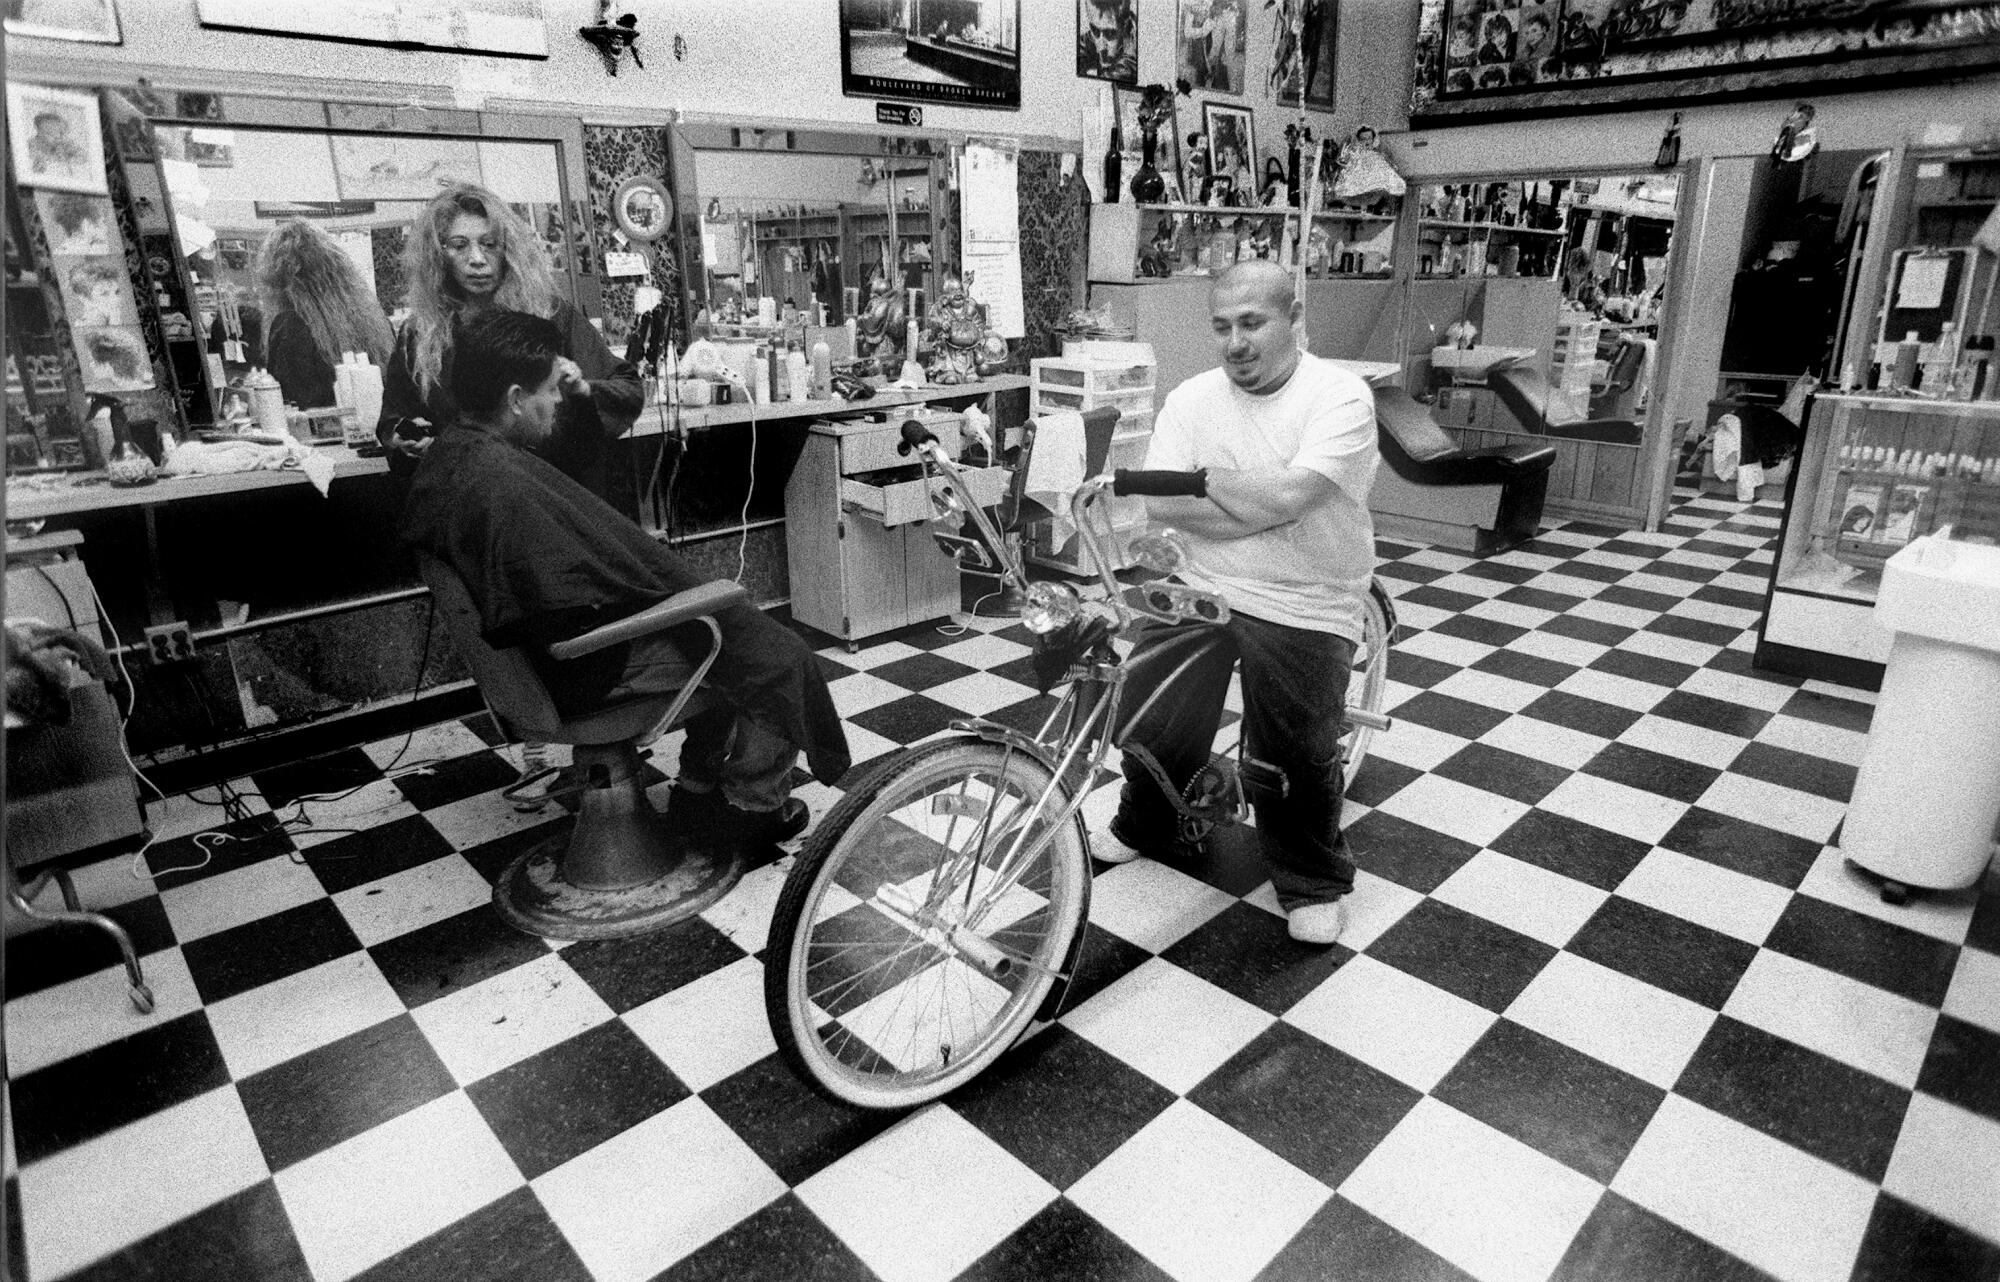 A man sits astride a bicycle in the middle of a salon as a woman cuts a customer's hair.